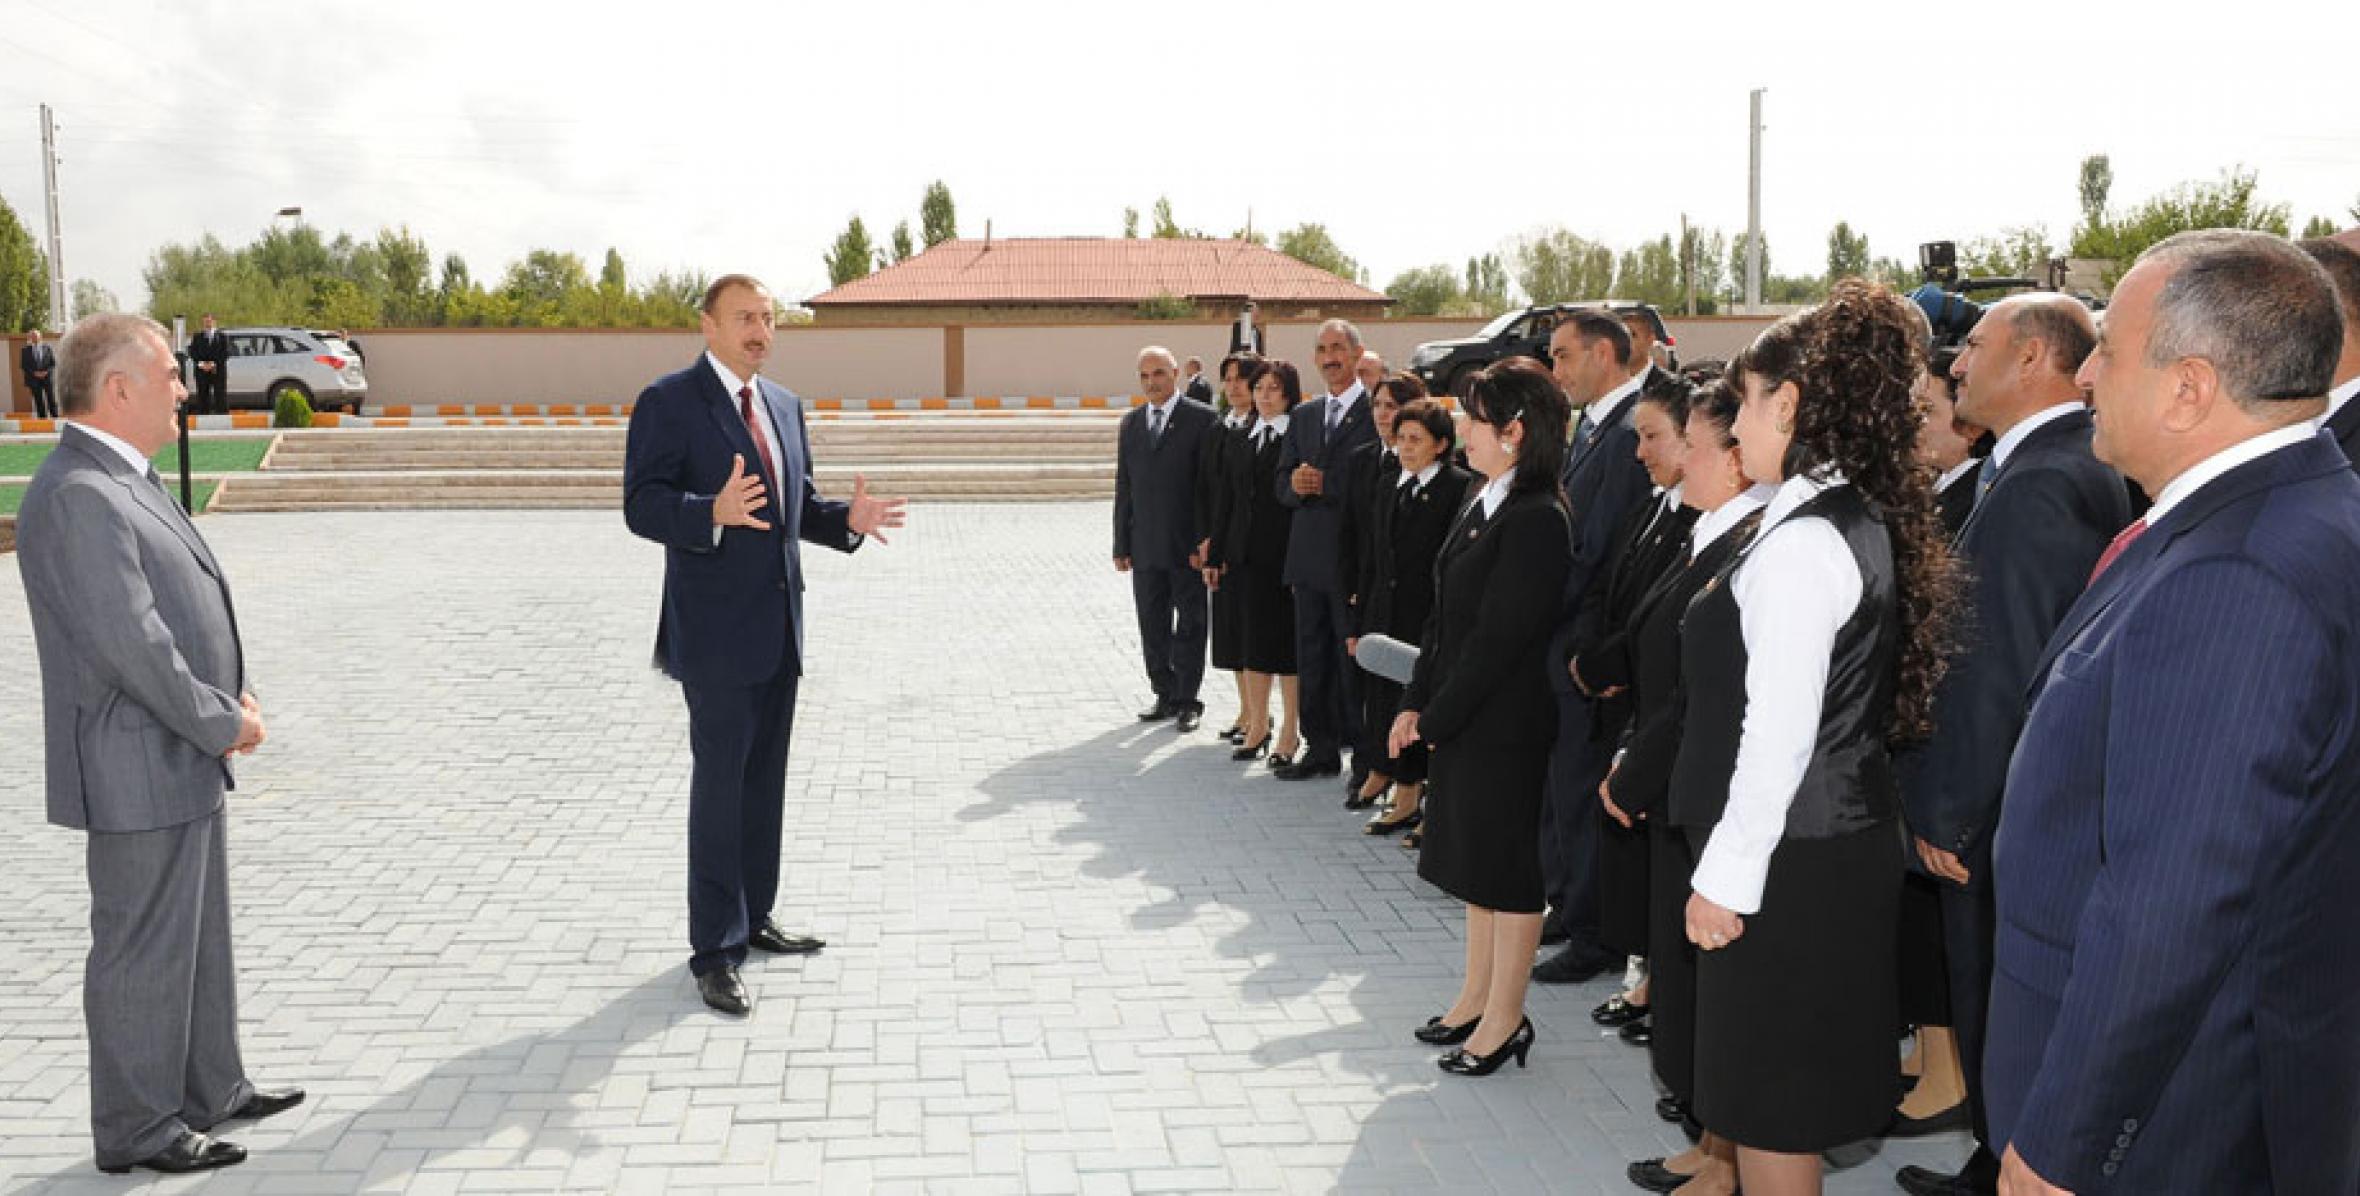 Ilham Aliyev attended the opening ceremony of anew building of Makhta village secondary school